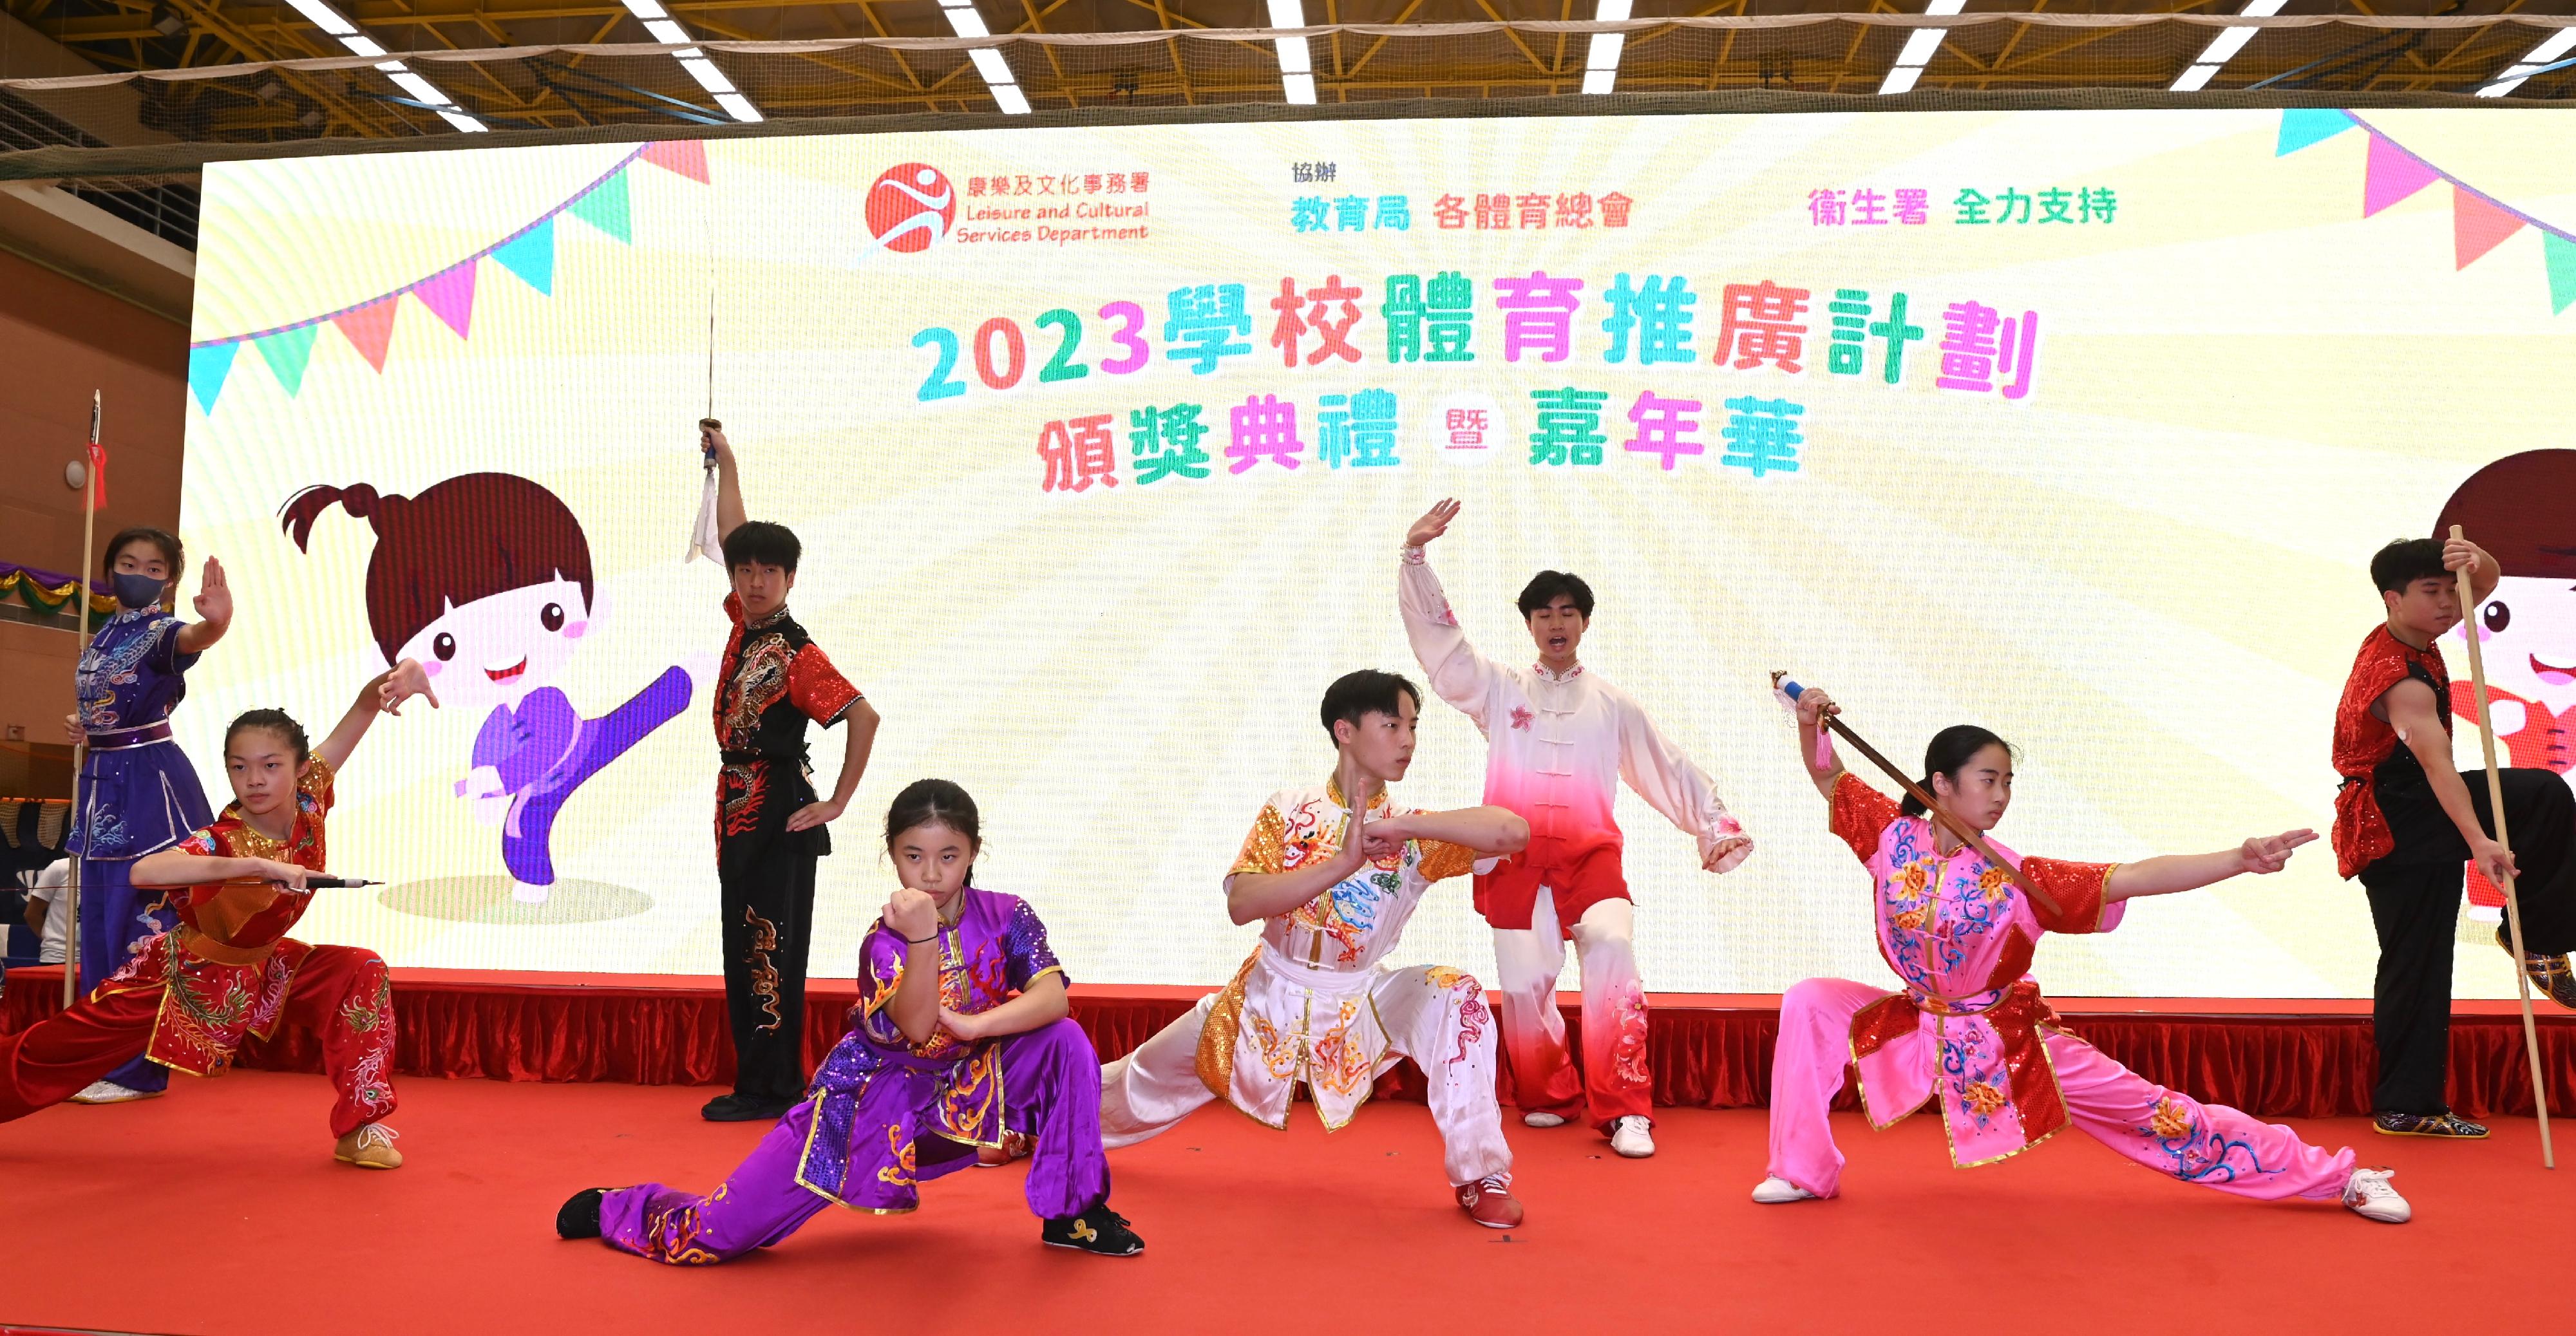 The Leisure and Cultural Services Department held the 2023 School Sports Programme Prize Presentation Ceremony cum Carnival at the Sun Yat Sen Memorial Park Sports Centre today (July 7). Photo shows representatives of the Hong Kong, China Wushu Union demonstrating wushu.